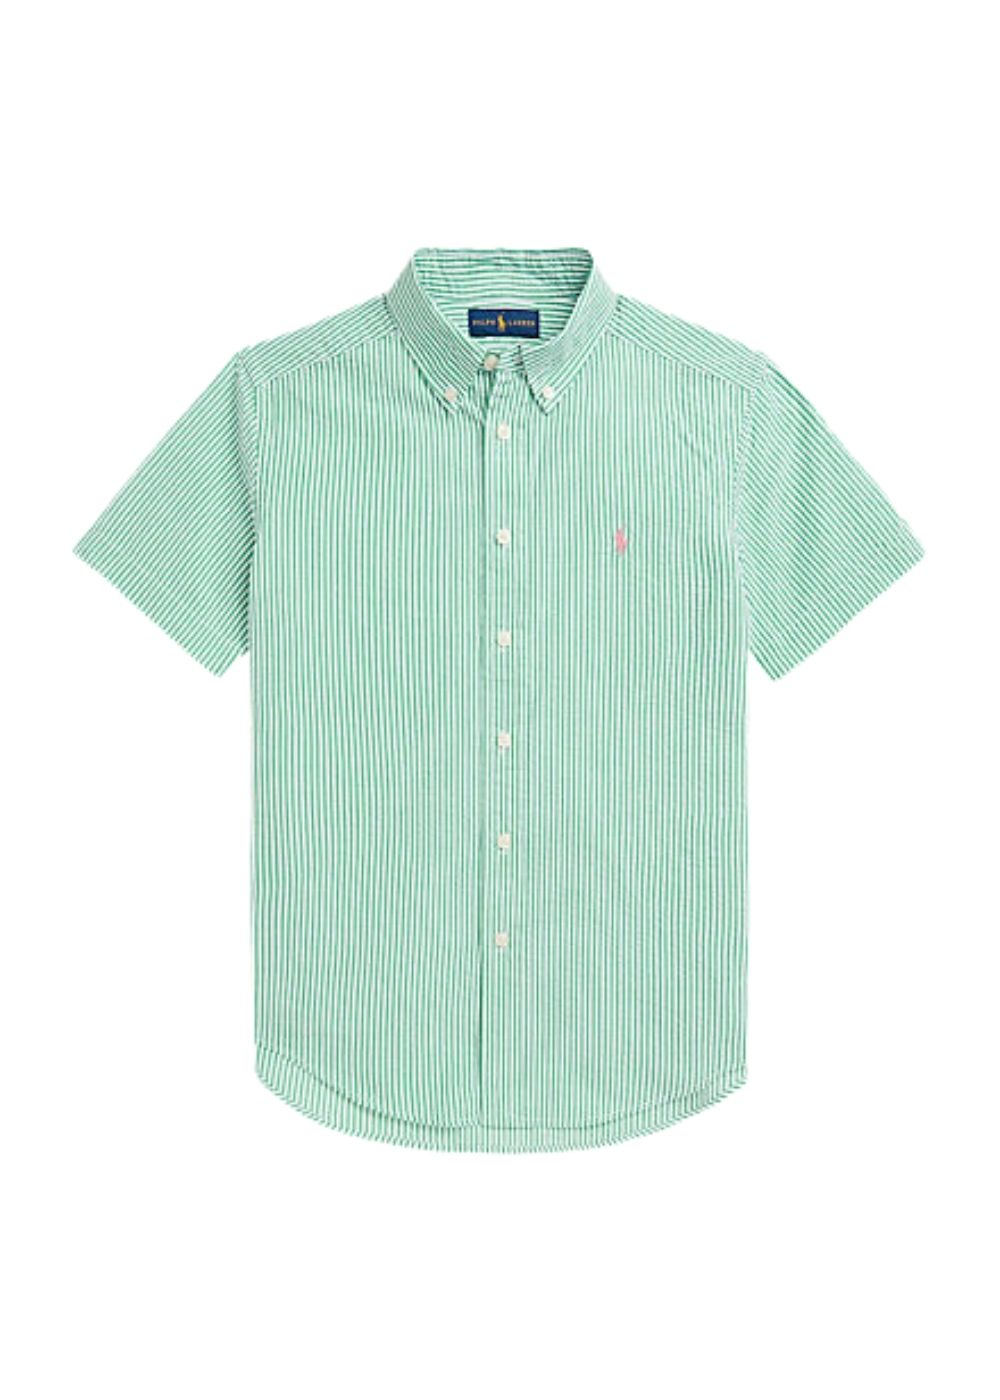 Featured image for “Polo Ralph Lauren Camicia A Righe”